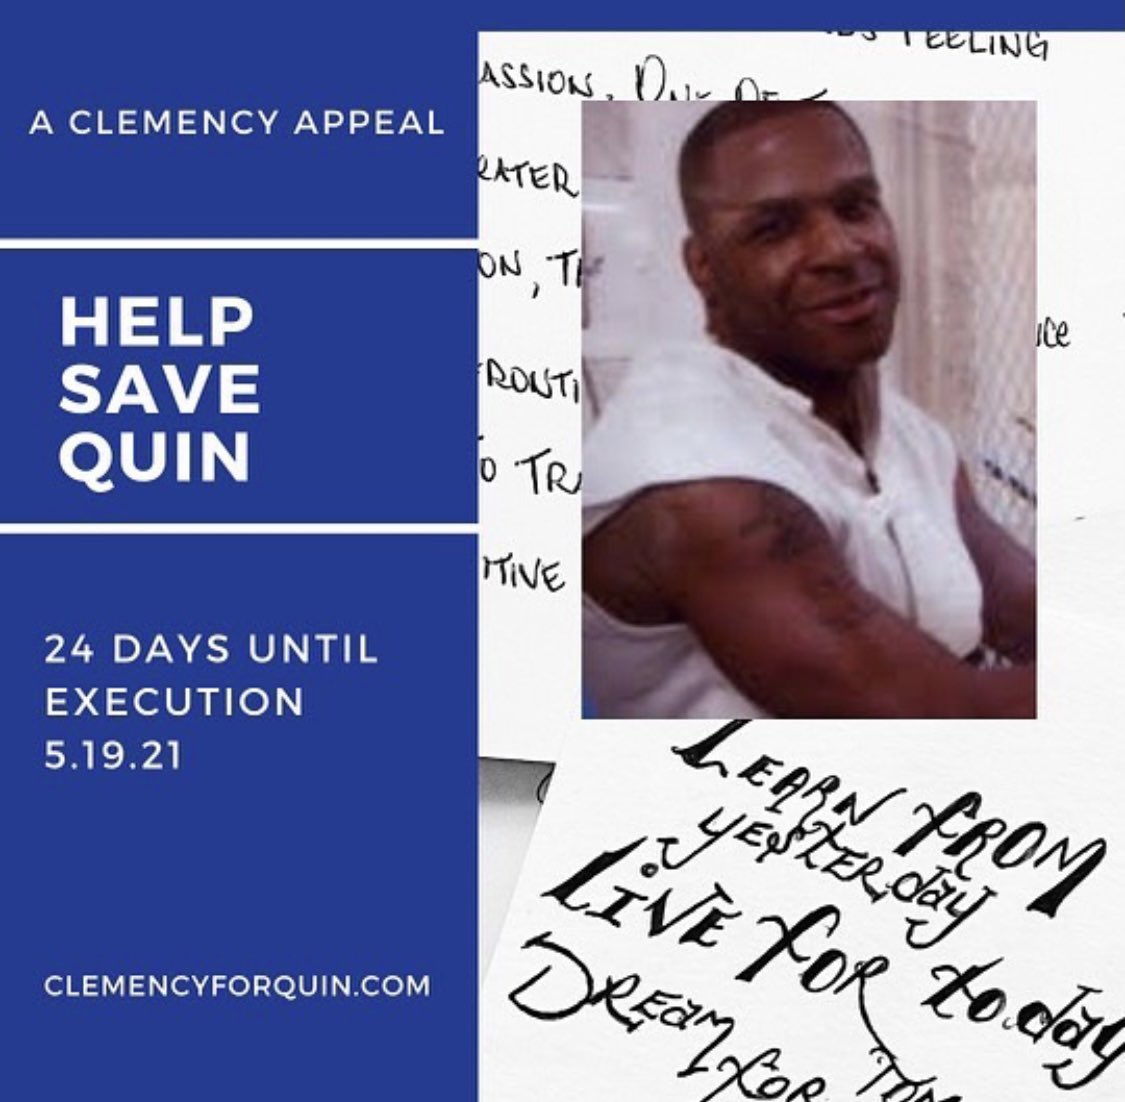 PLEASE sign this petition for Quinn’s clemency and read more about his story at link in our bio. I want to live in a world where people can change, heal, forgive, move forward and contribute light after darkness. Quin’s created light for years. Thread for more  #ClemencyForQuin